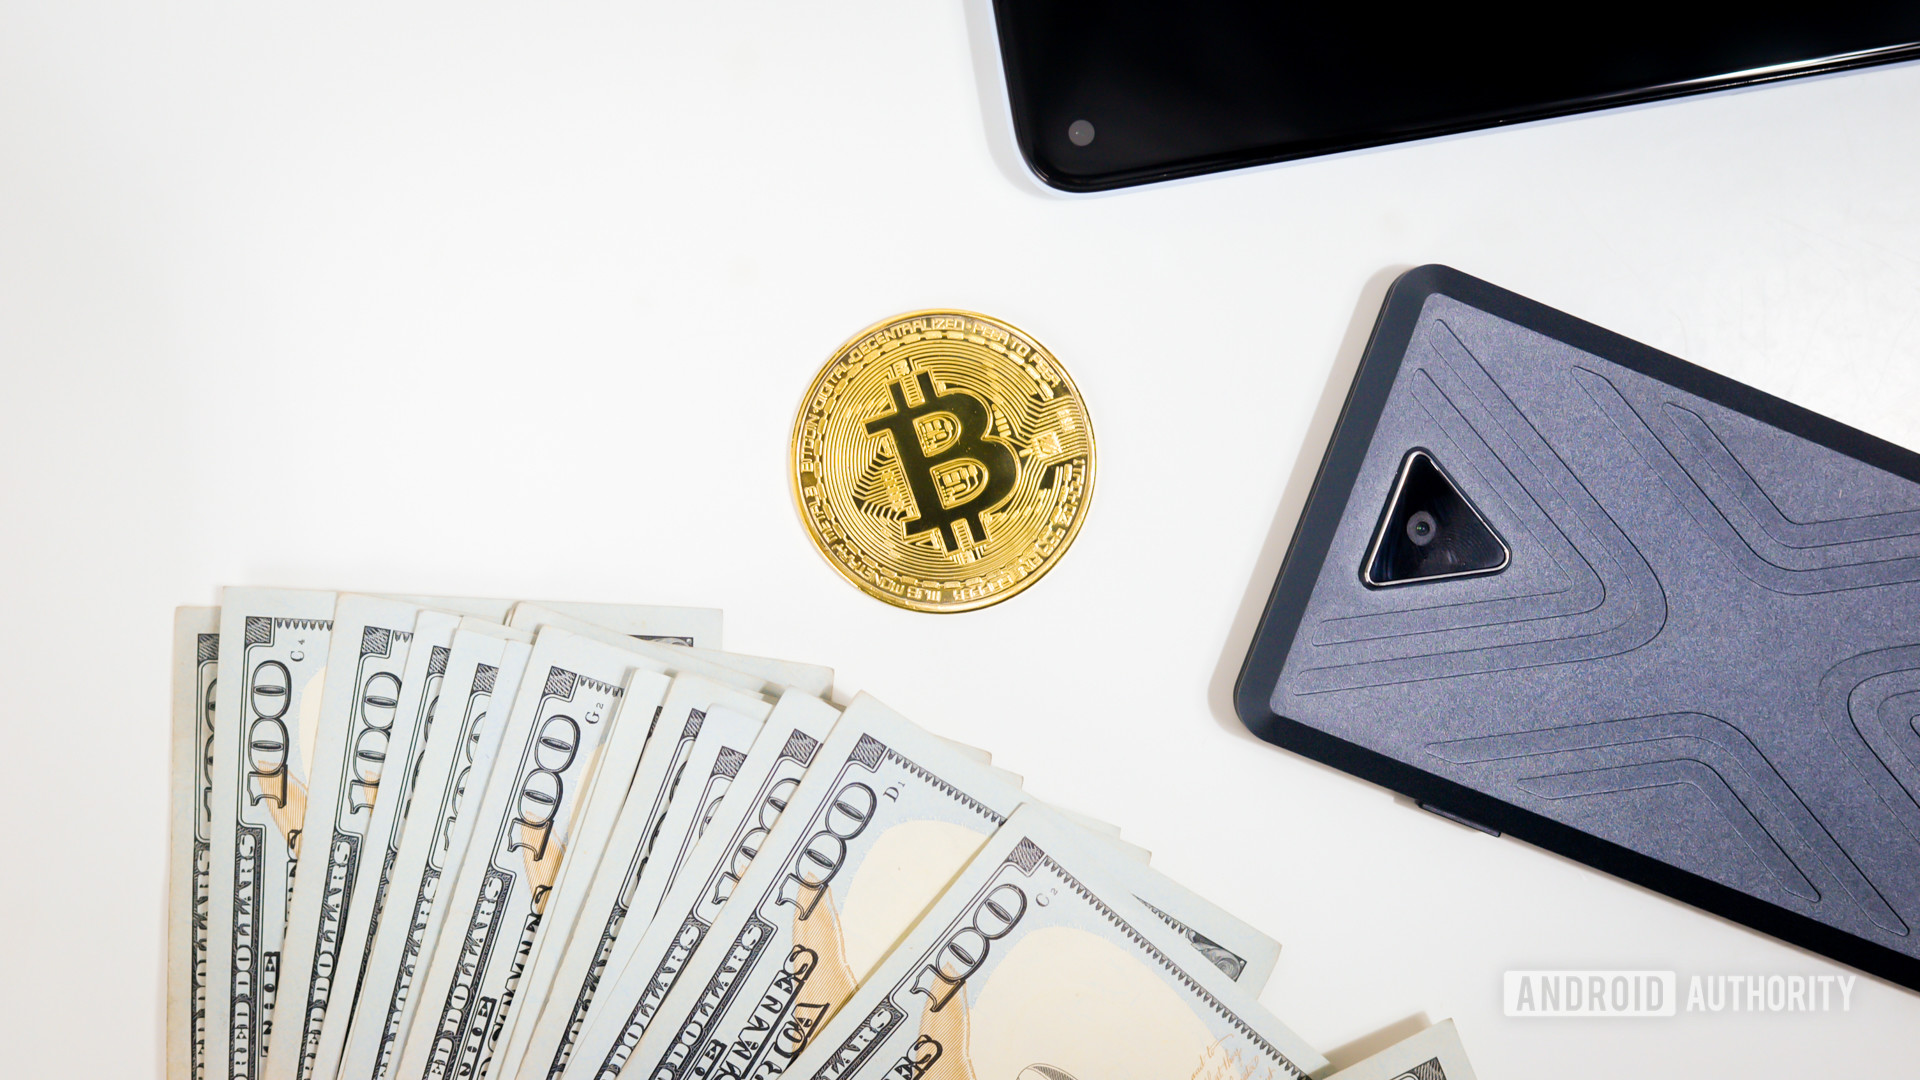 Bitcoin stock photo 12 - The best digital gifts